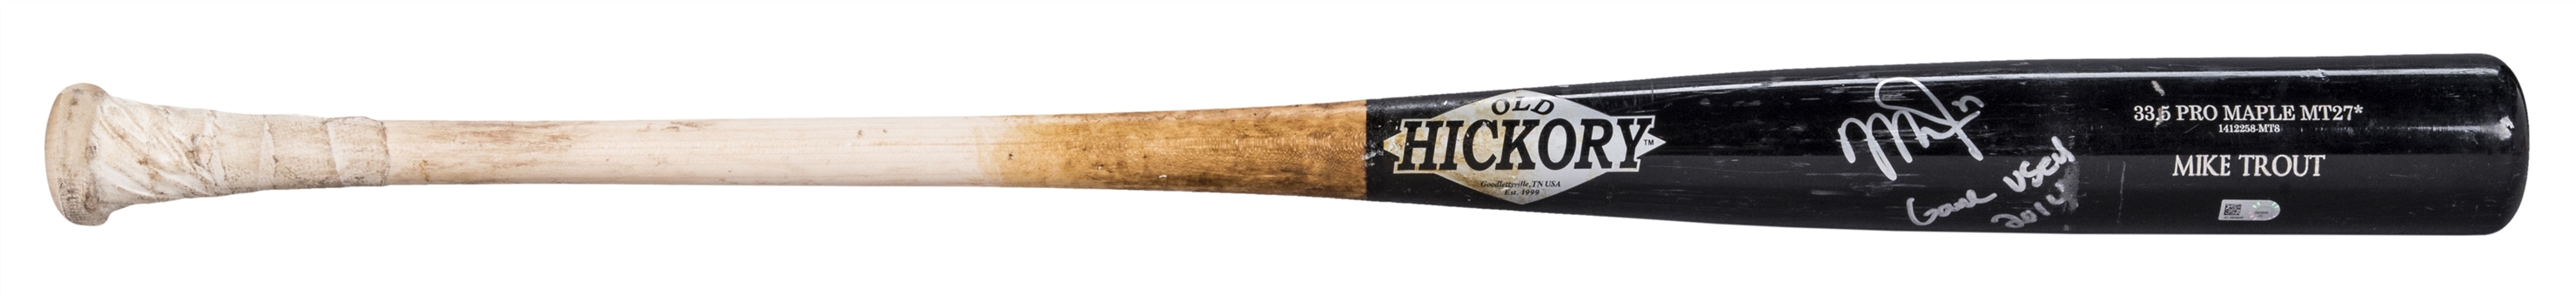 2014 Mike Trout MVP Game Used and Signed Old Hickory MT27* Model Bat (PSA/DNA GU 9.5 & MLB Authenticated)